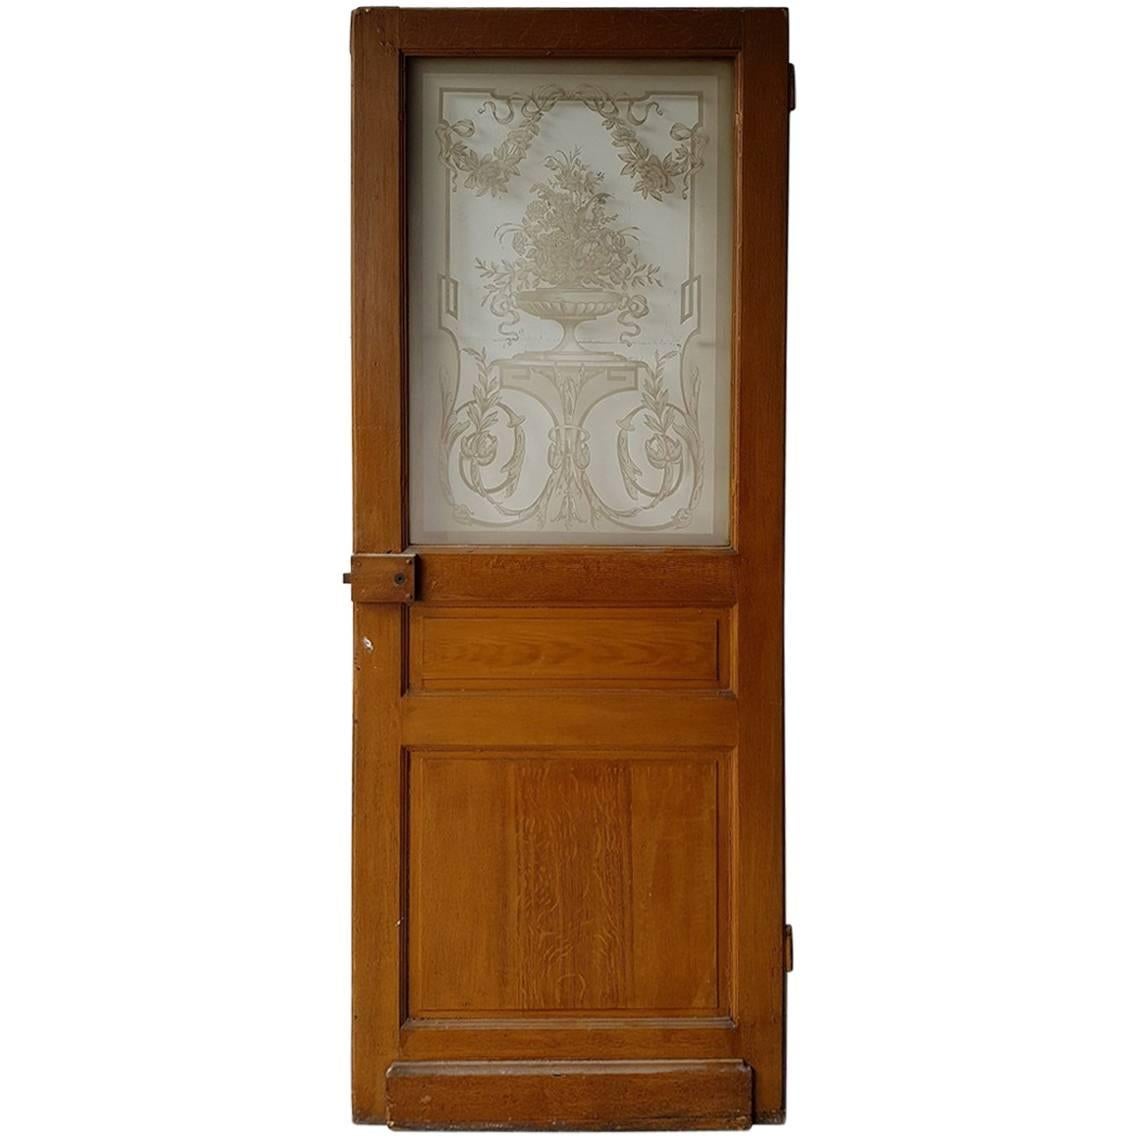 Late 19th Century Dutch Wooden Door with Etched Glass Panel